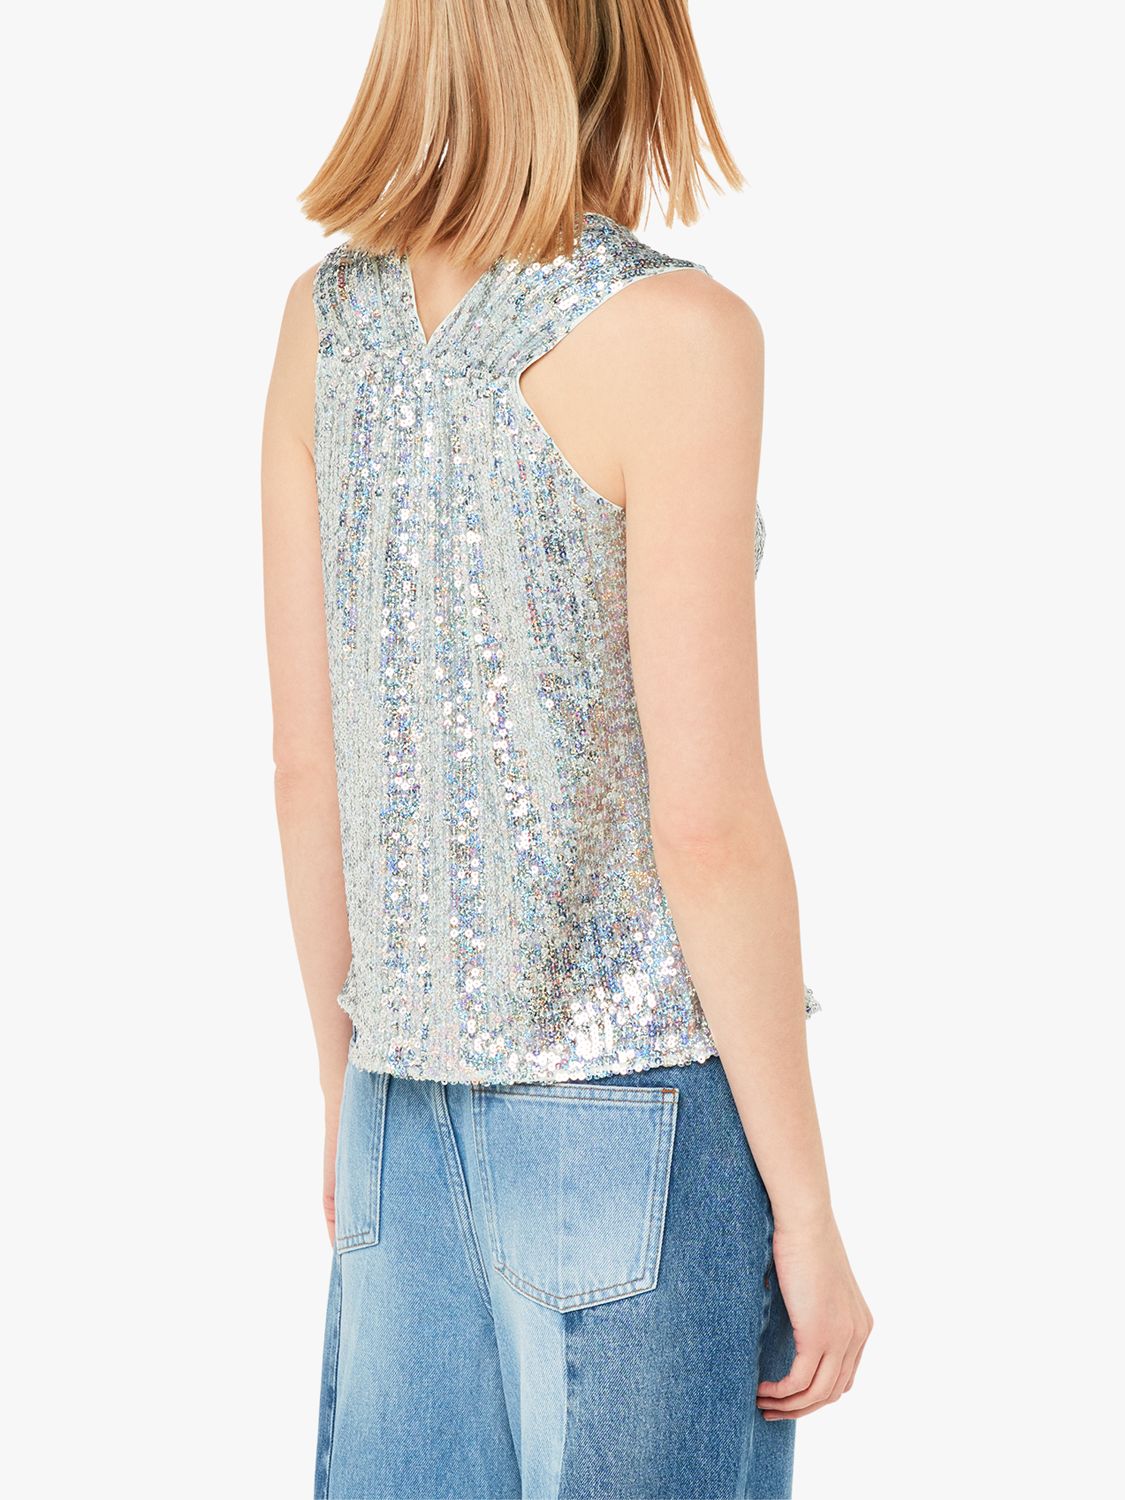 Whistles Claudia Sequin Vest Top, Silver, 18